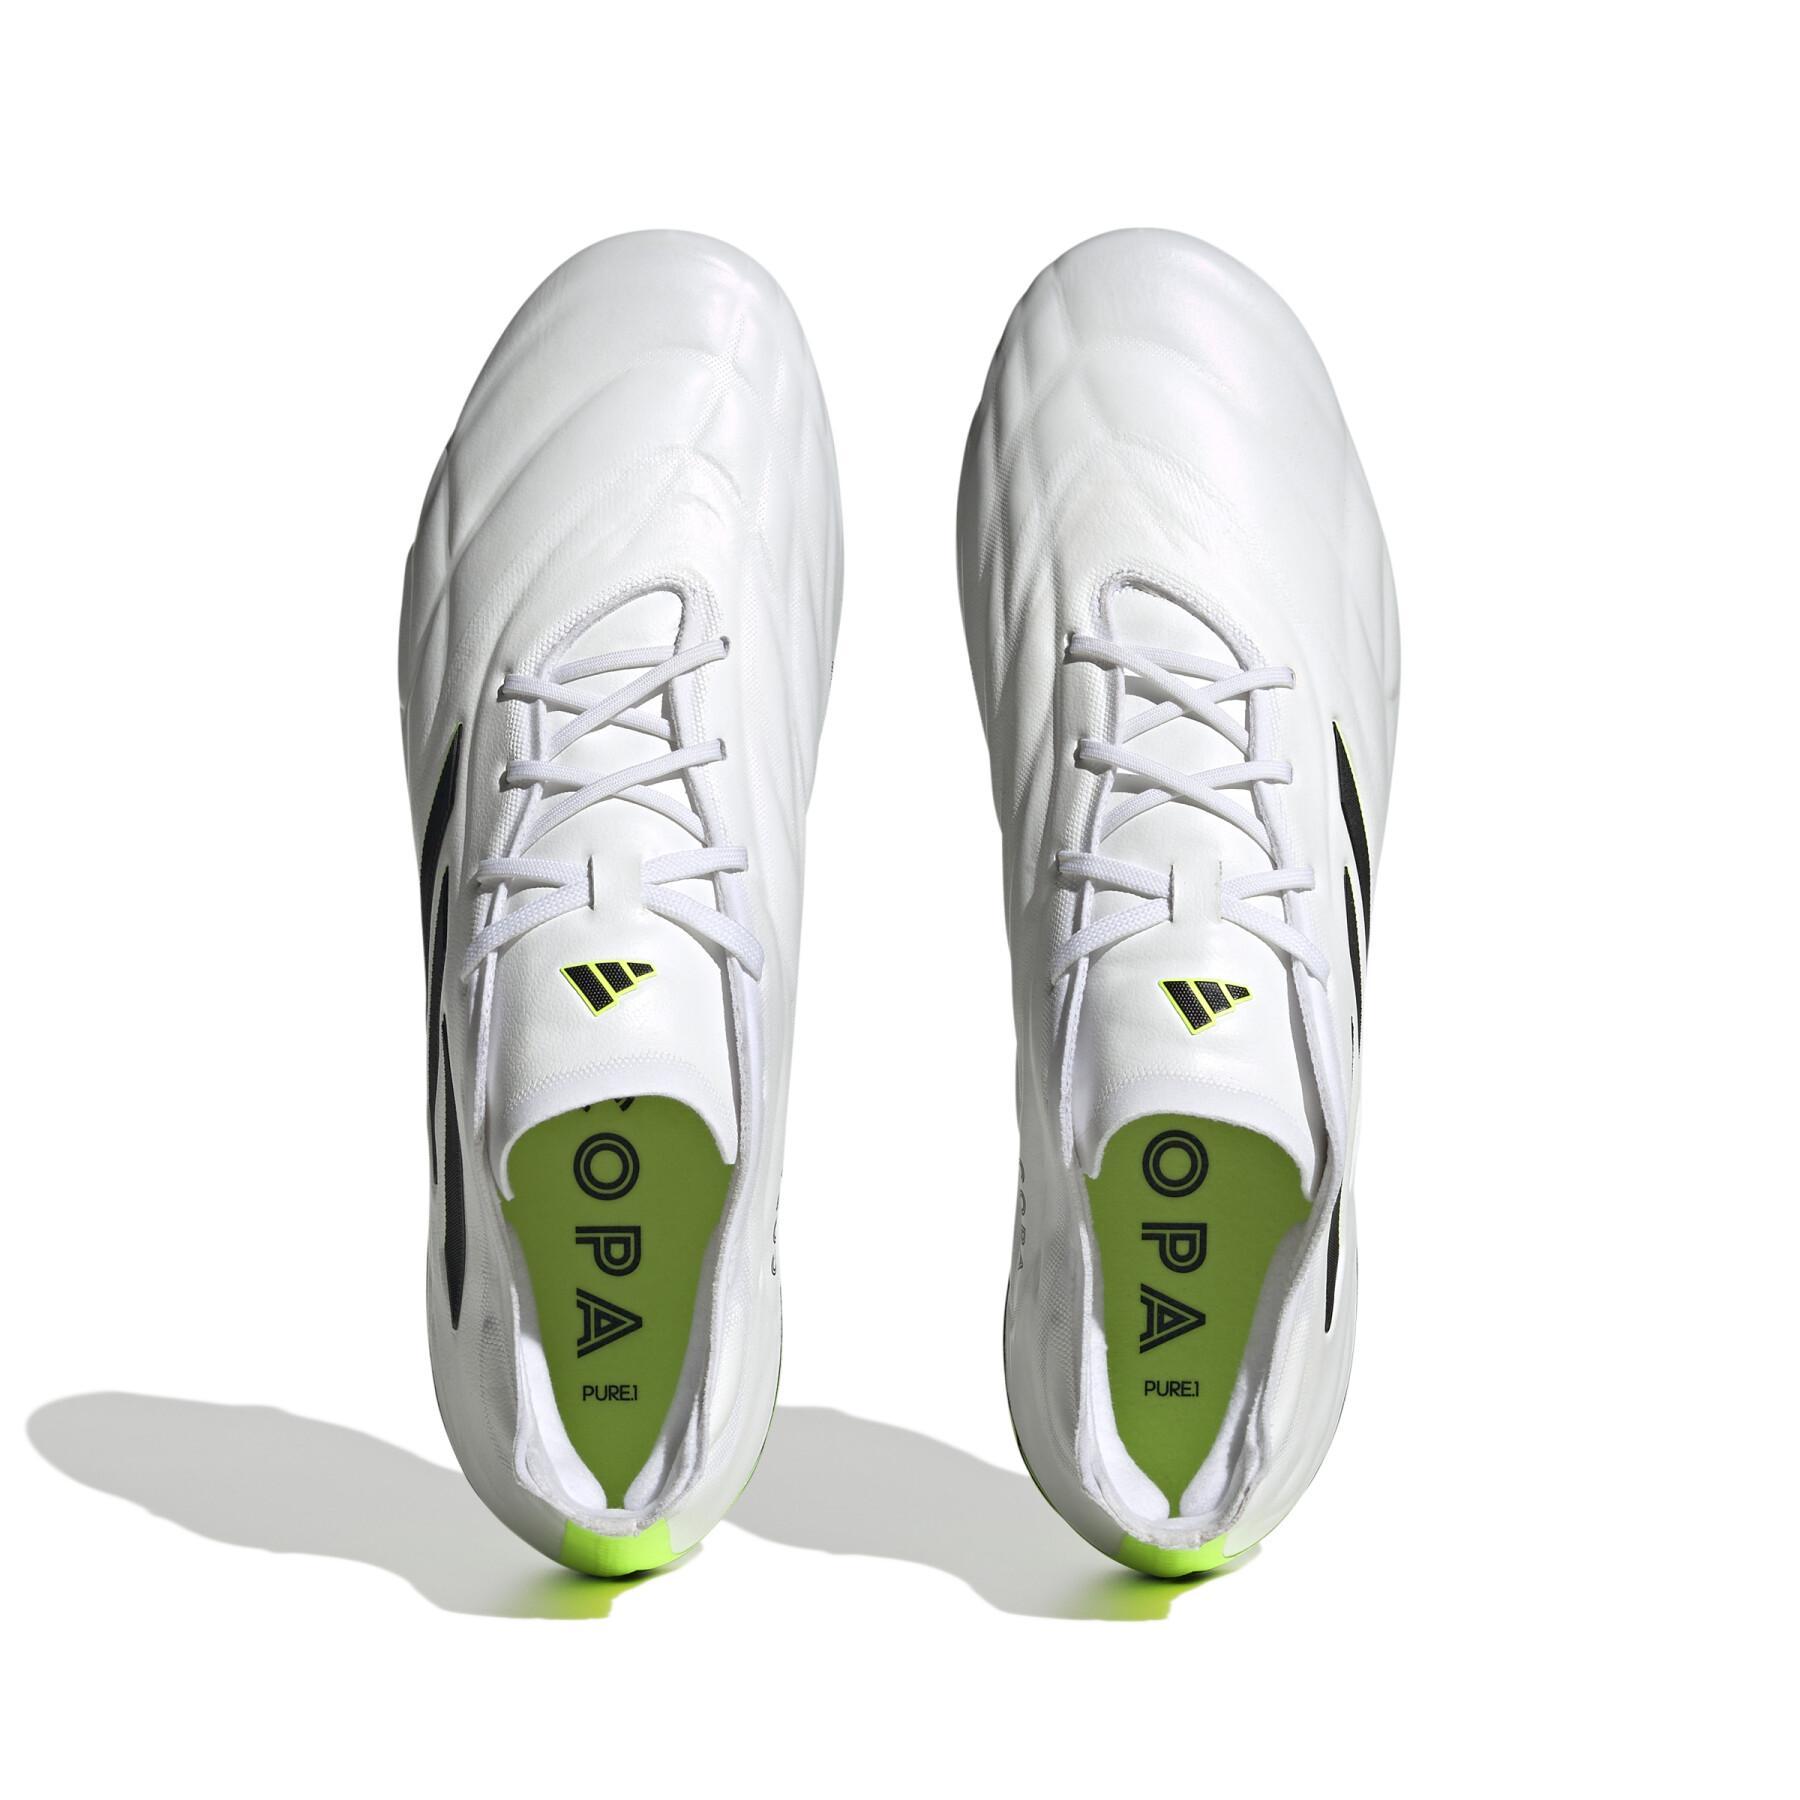 Soccer cleats adidas Copa Pure.1 FG